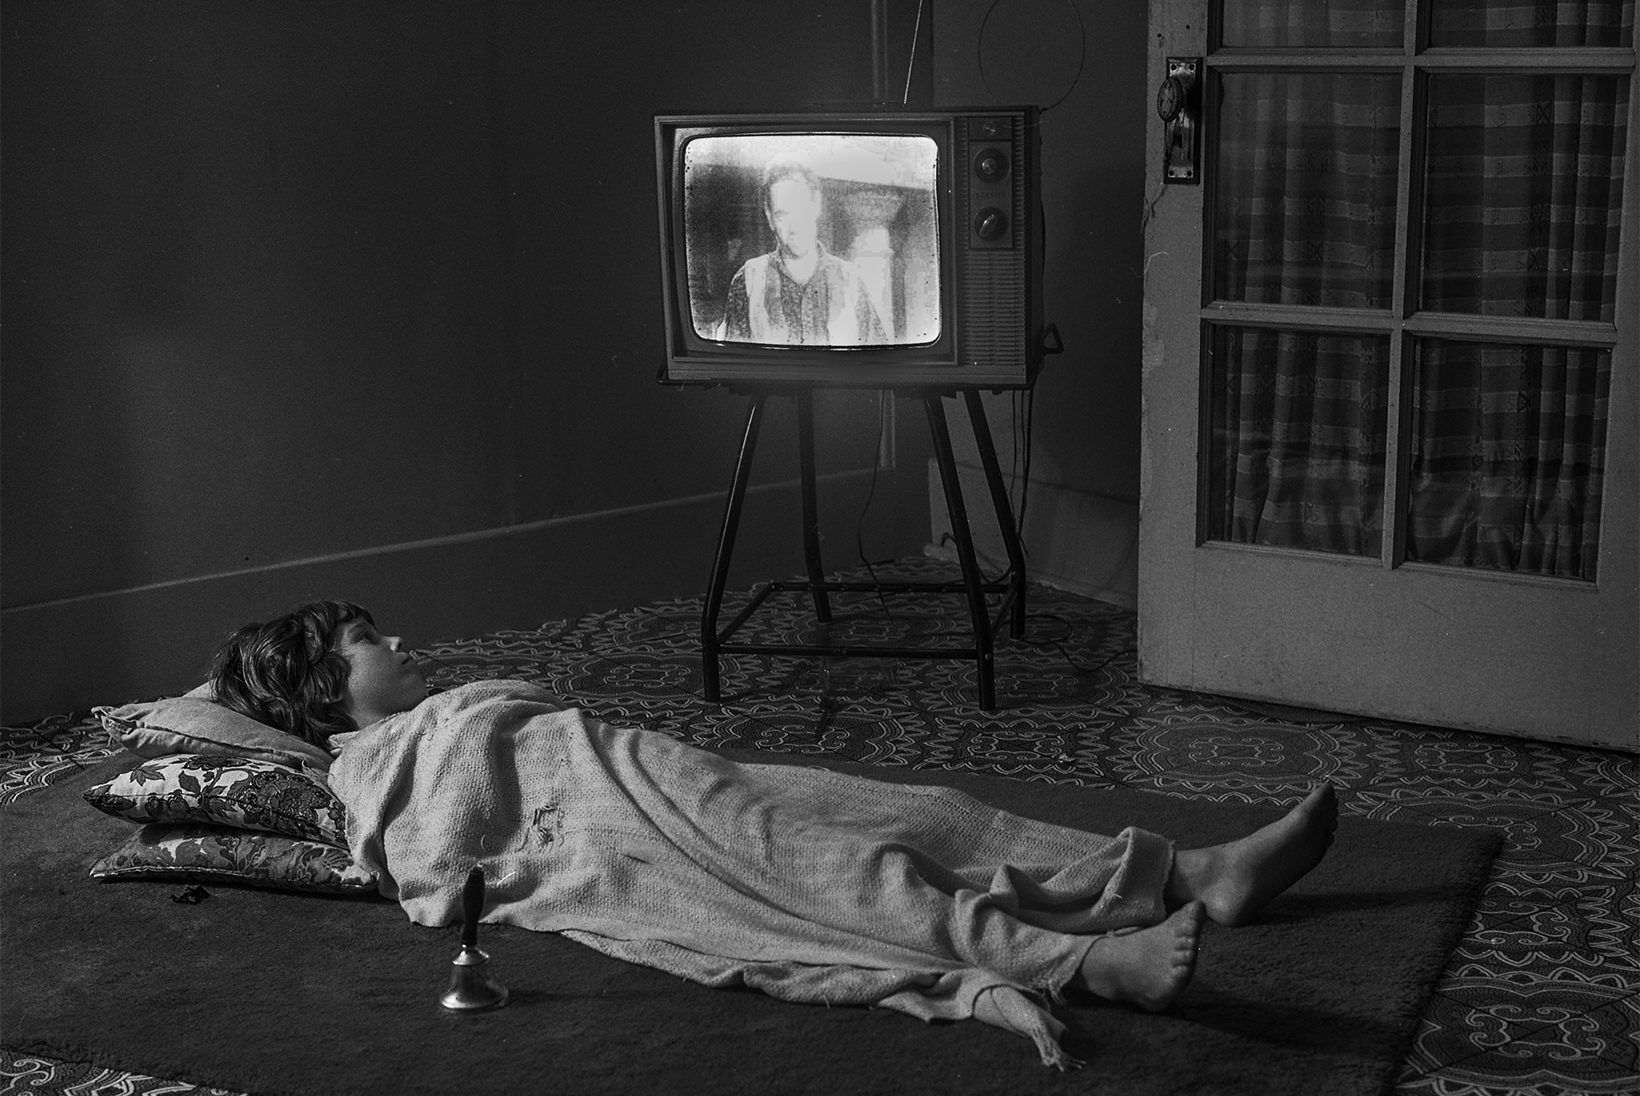 A young boy in the 1970s is flat on his back on the floor atop an area rug on top of carpeting with three pillows under his head and covered with a blanket in a room with an old-fashioned television. There is a long-handled bell near him on the rug.